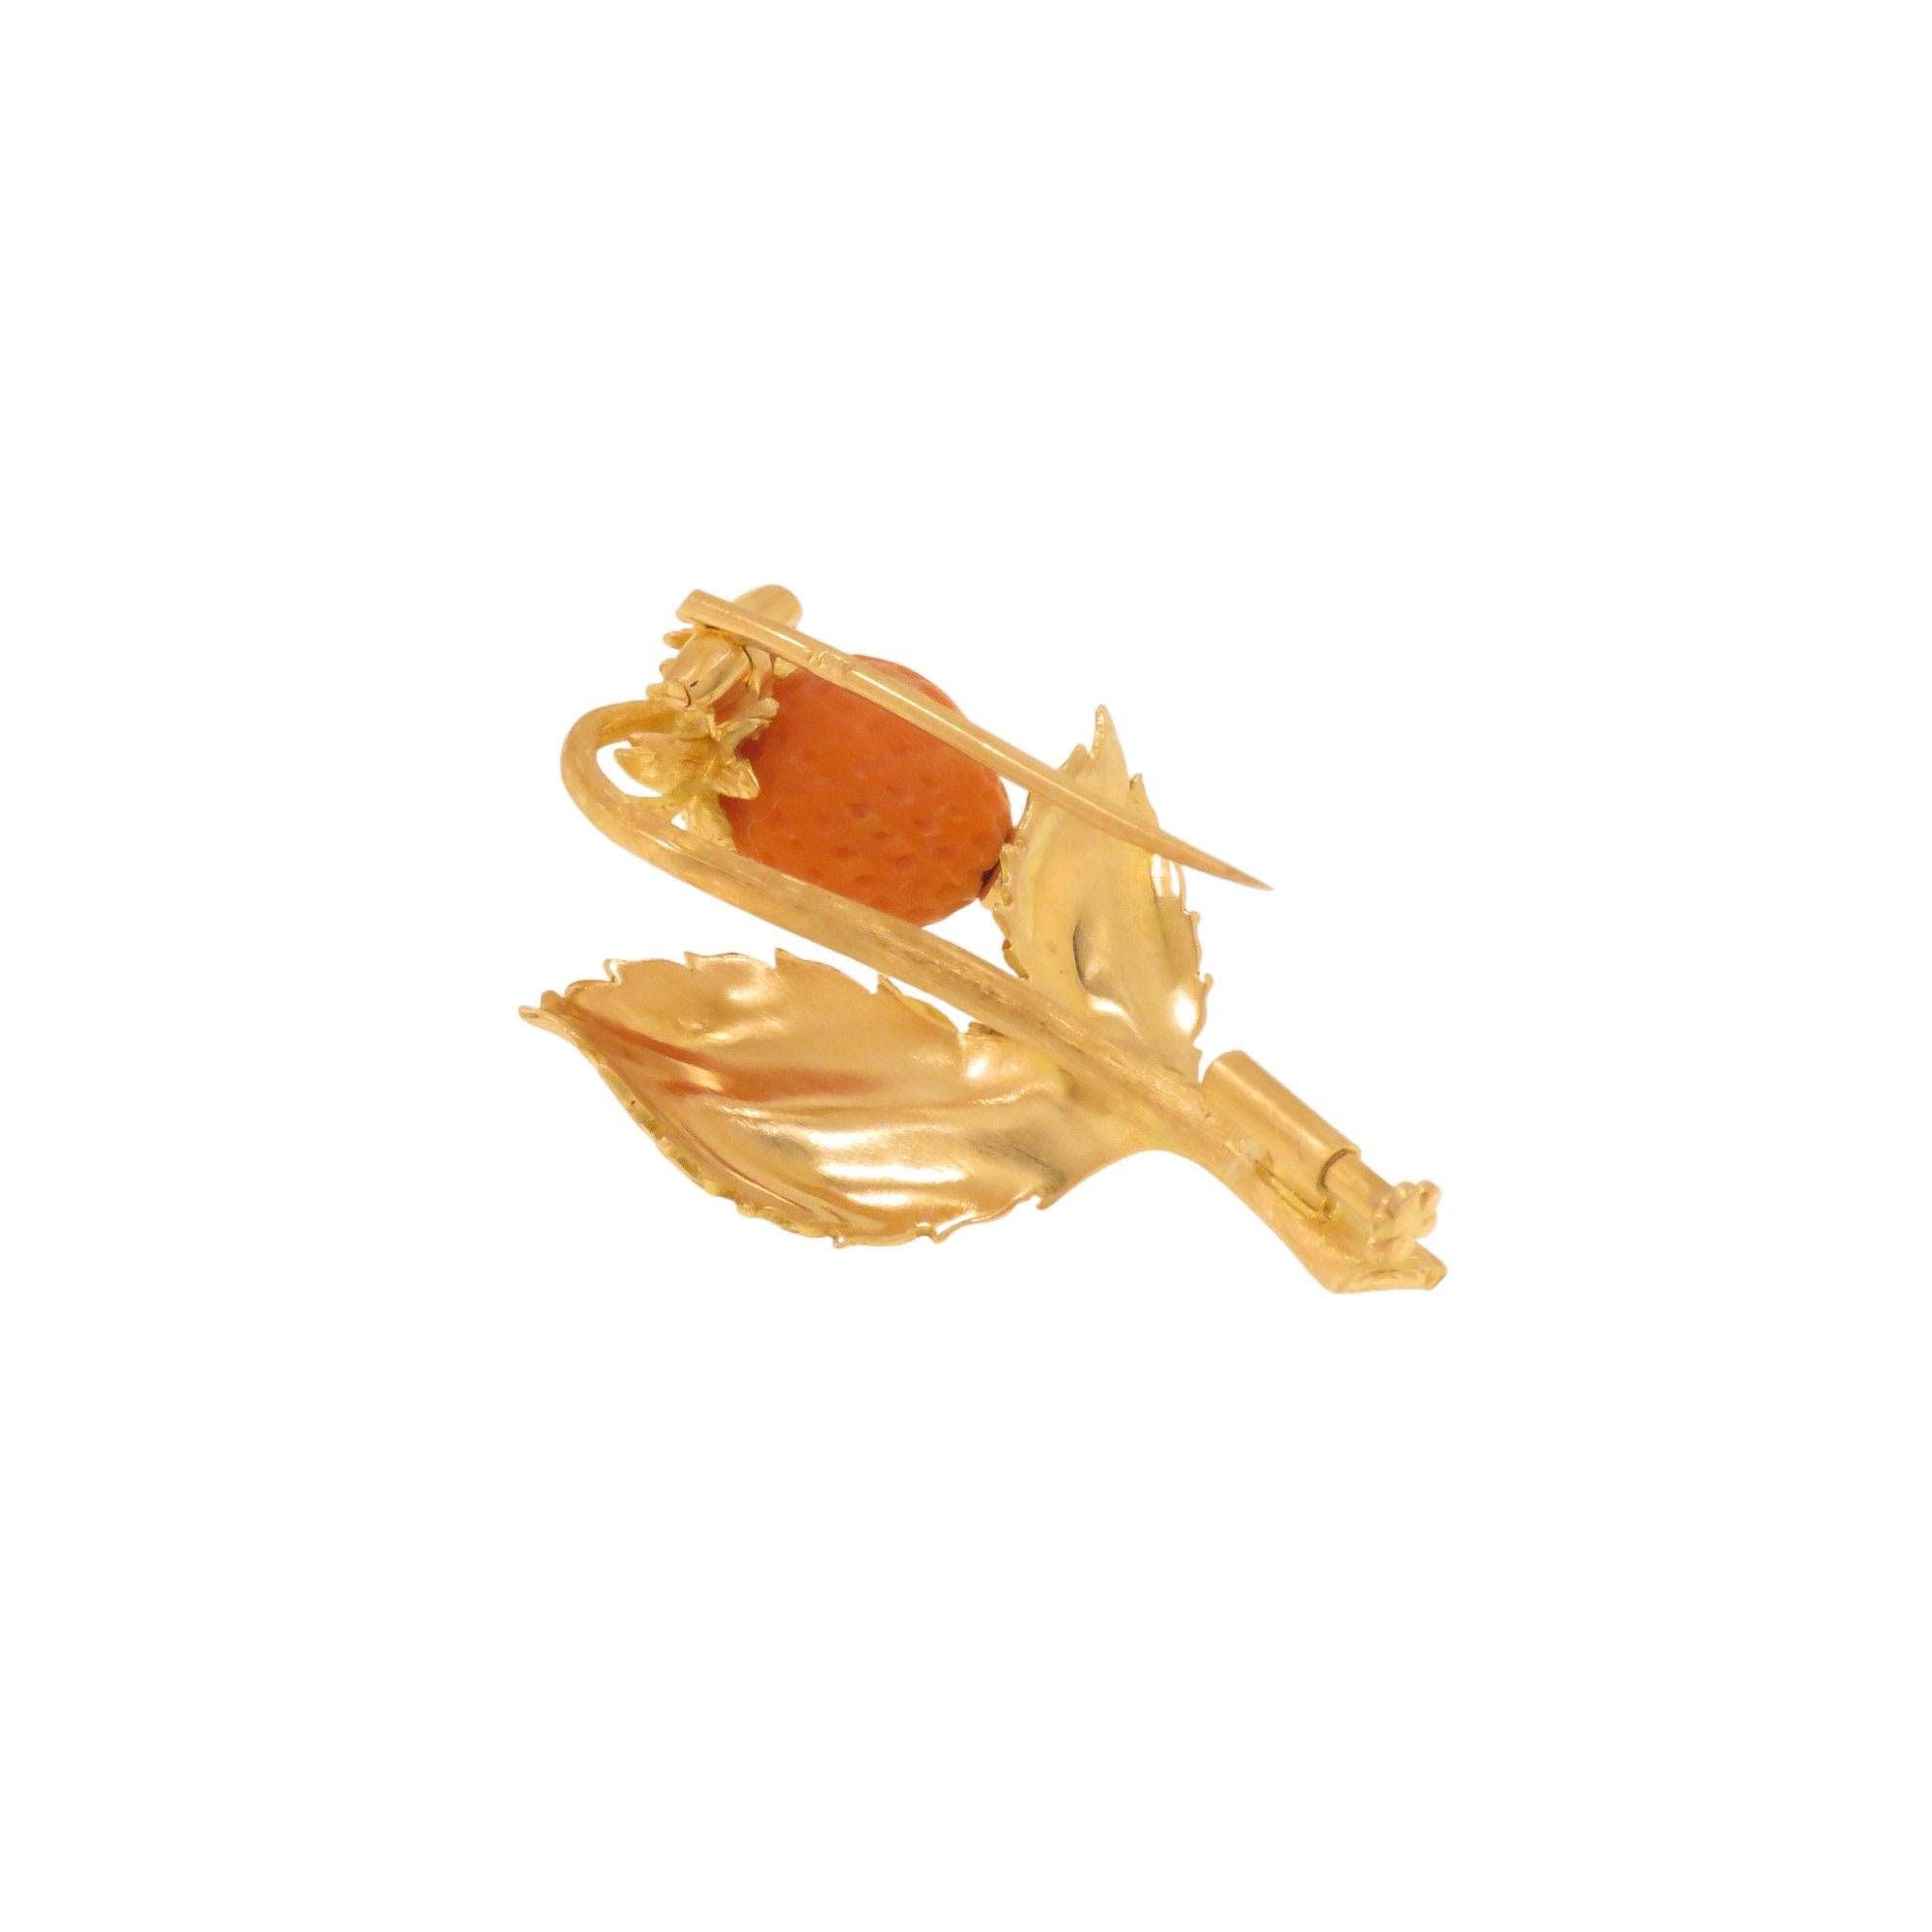 Uncut Strawberry-shaped brooch in yellow gold For Sale